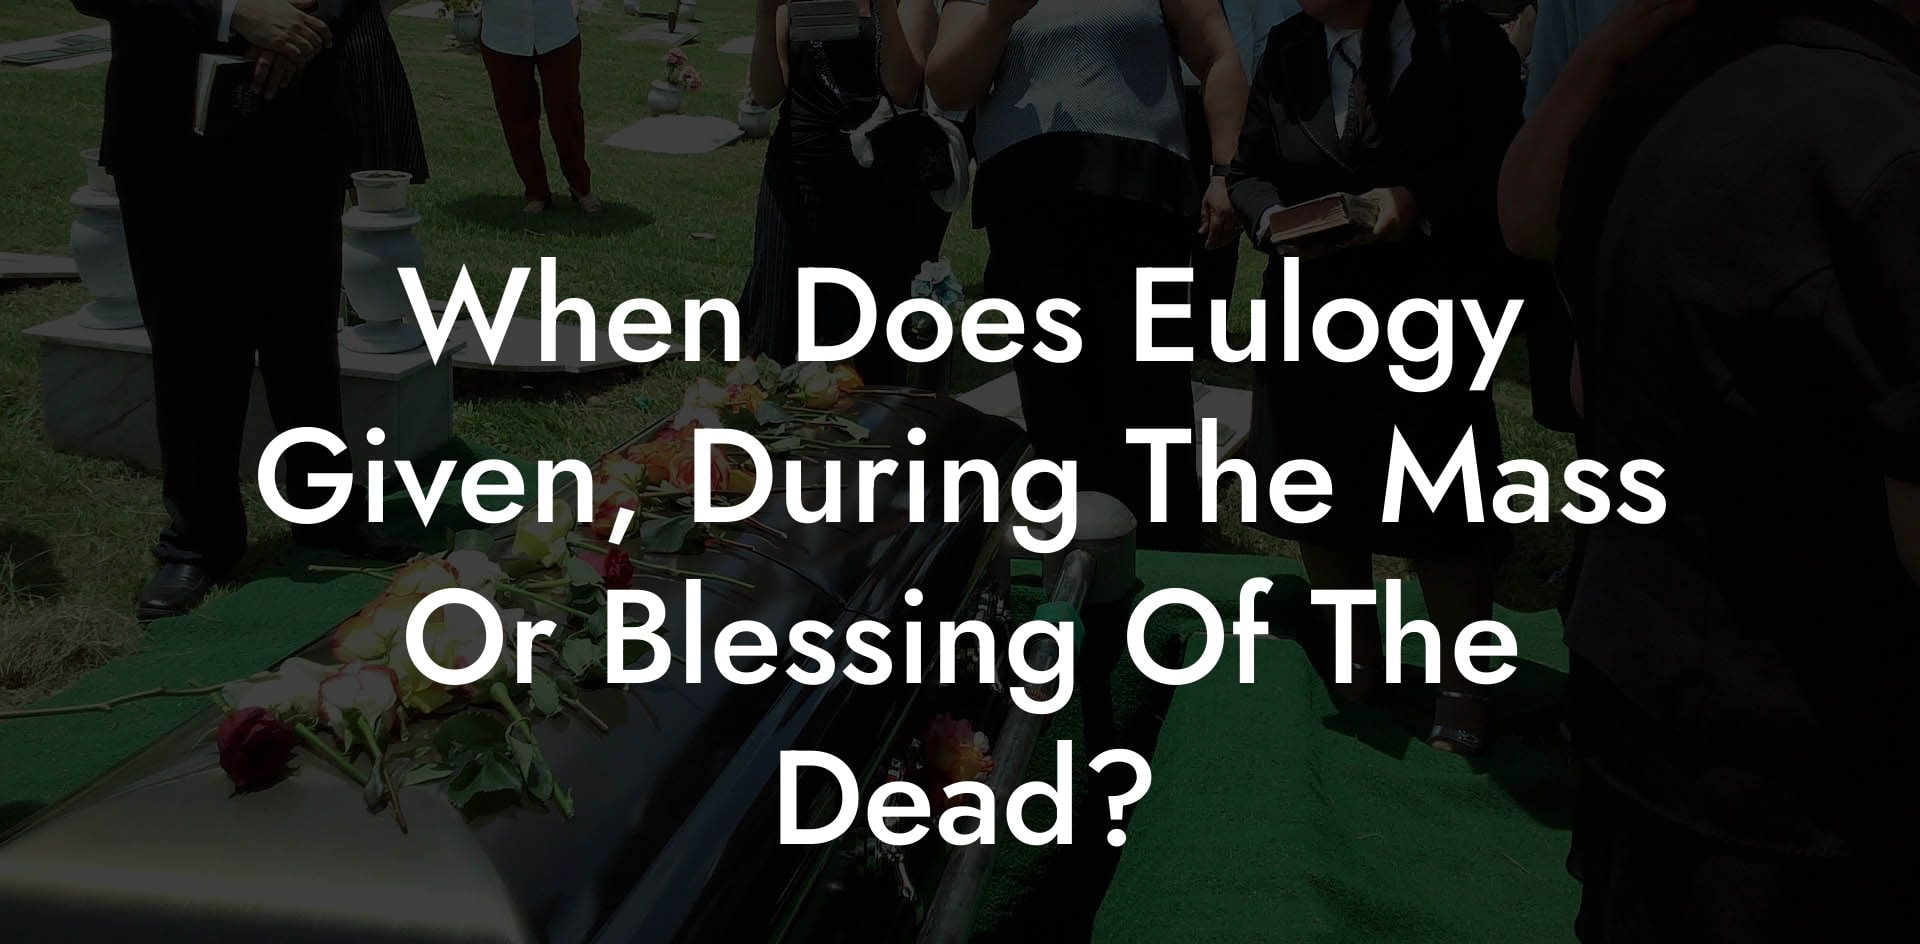 When Does Eulogy Given, During The Mass Or Blessing Of The Dead?